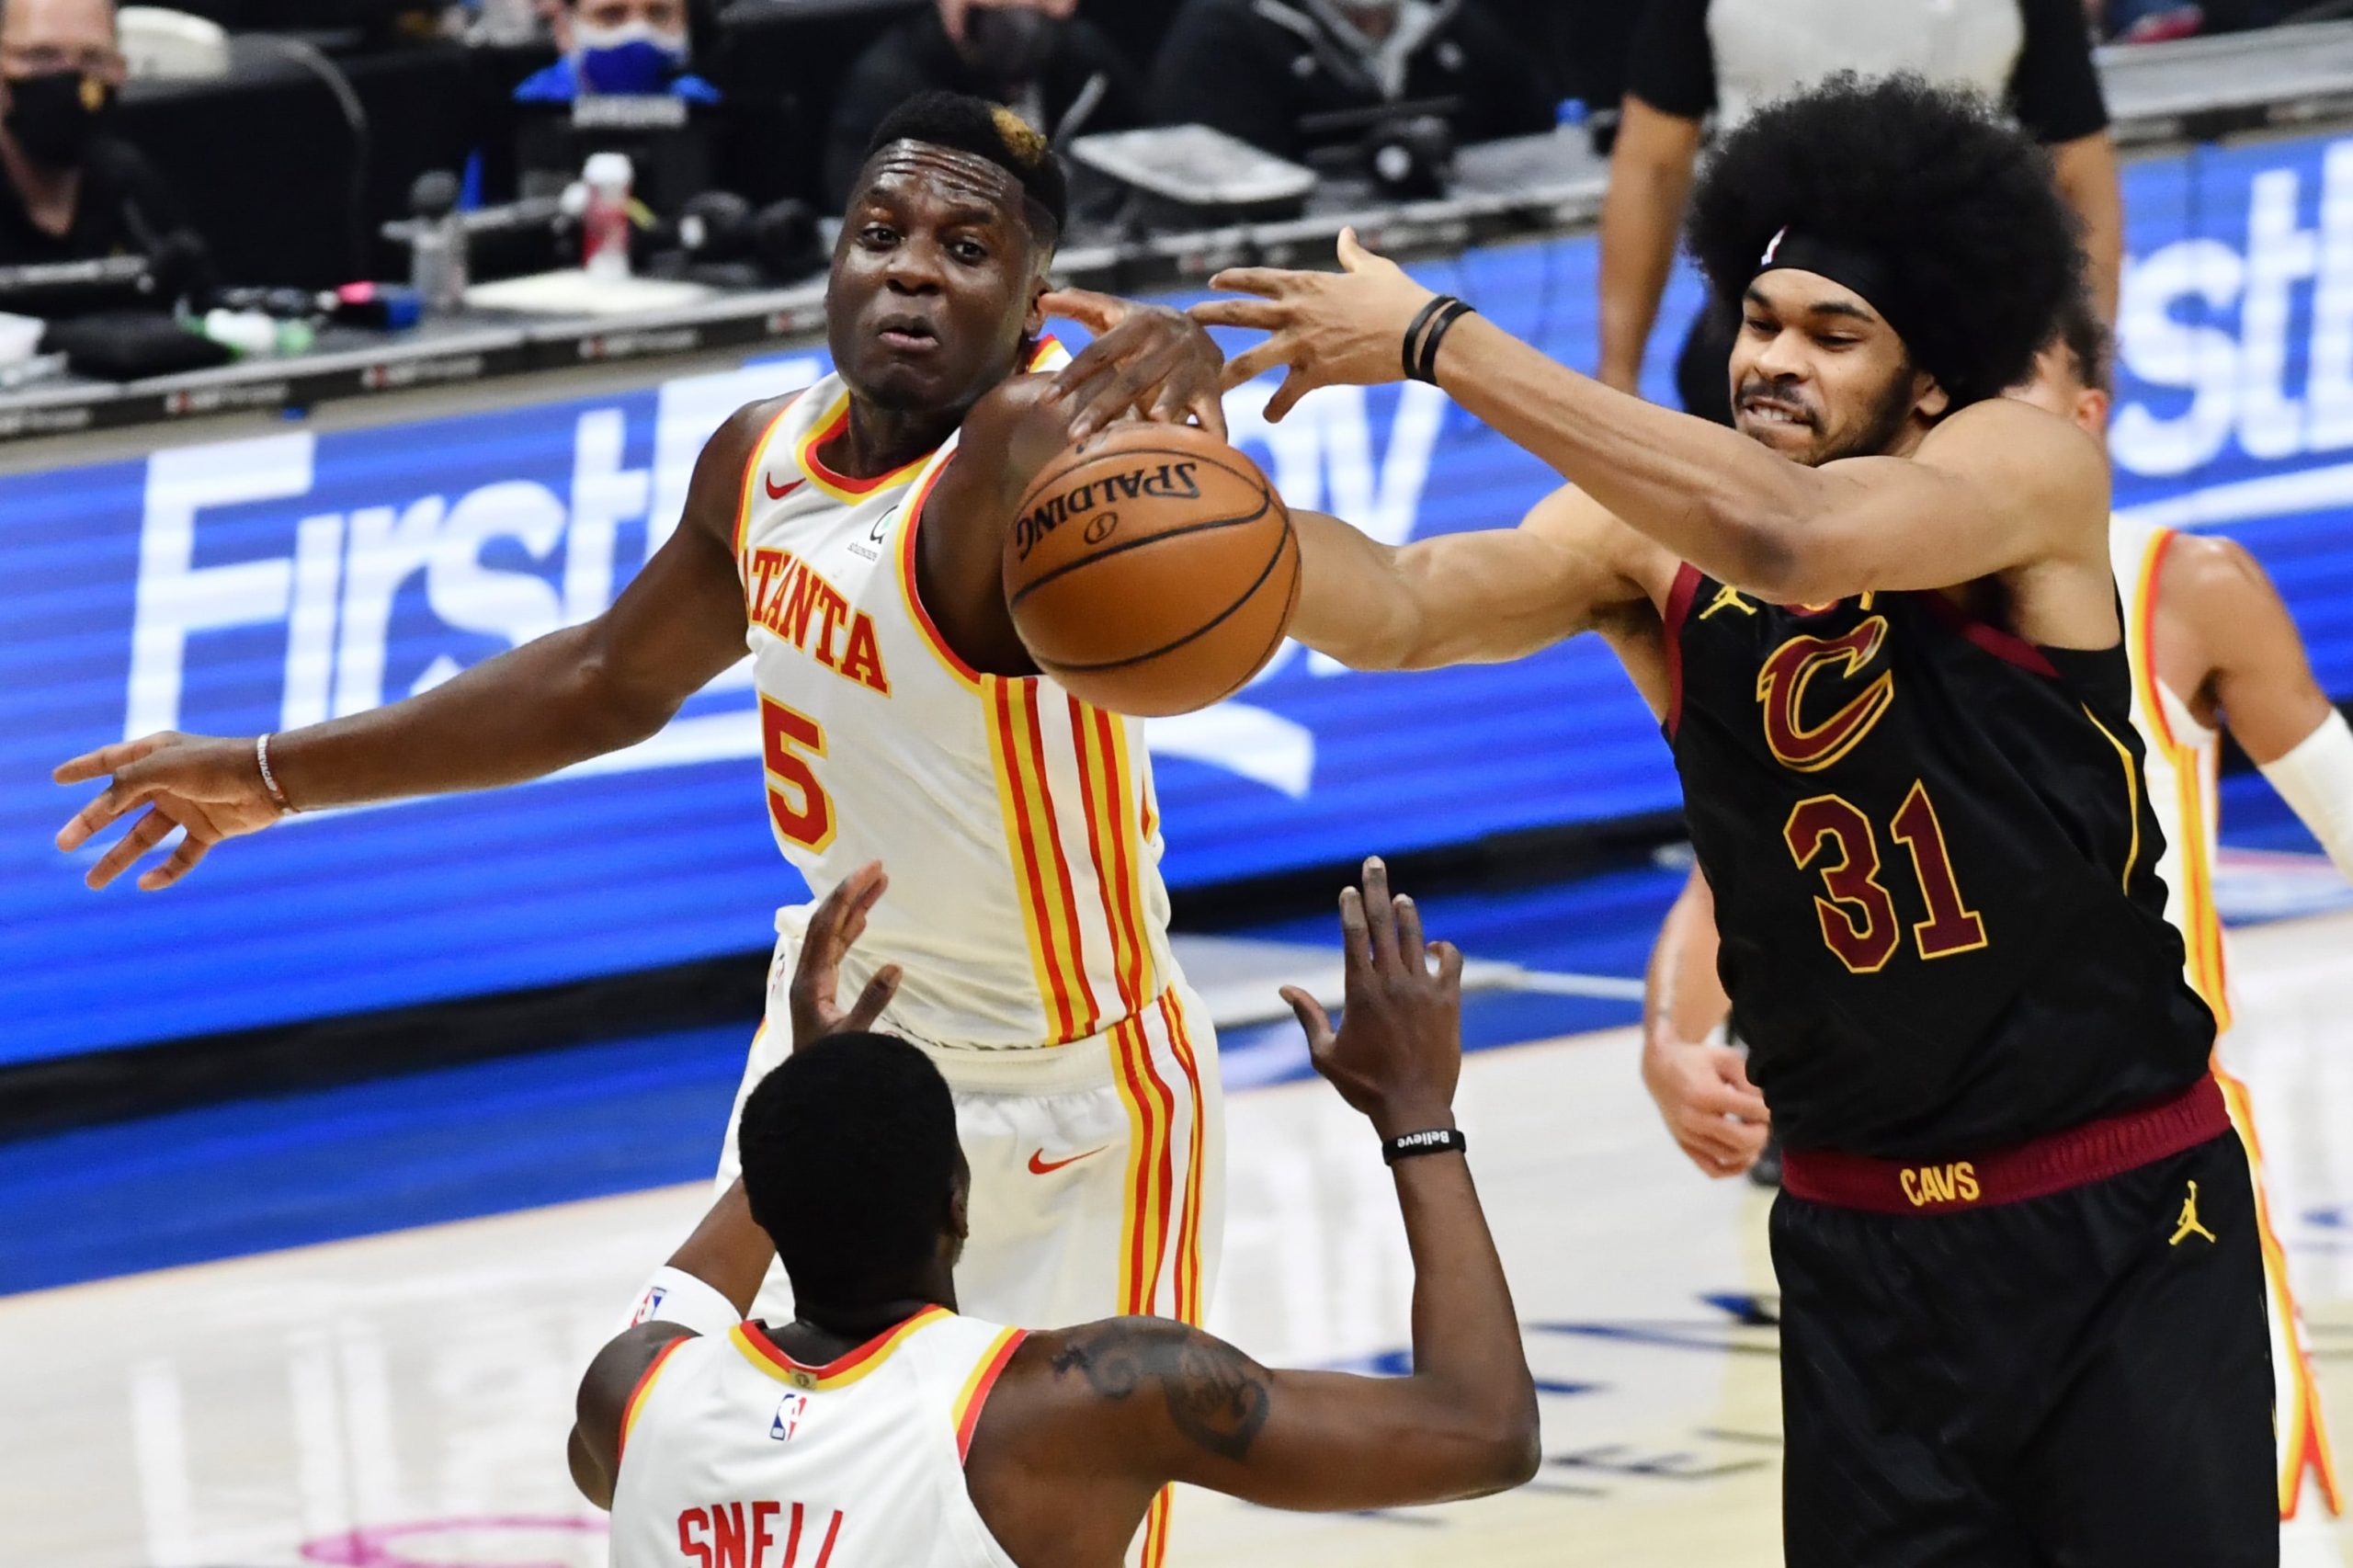 Cleveland Cavaliers center Jarrett Allen (31) goes for a rebound against Atlanta Hawks center Clint Capela (15) and guard Tony Snell (19) during the second quarter at Rocket Mortgage FieldHouse.